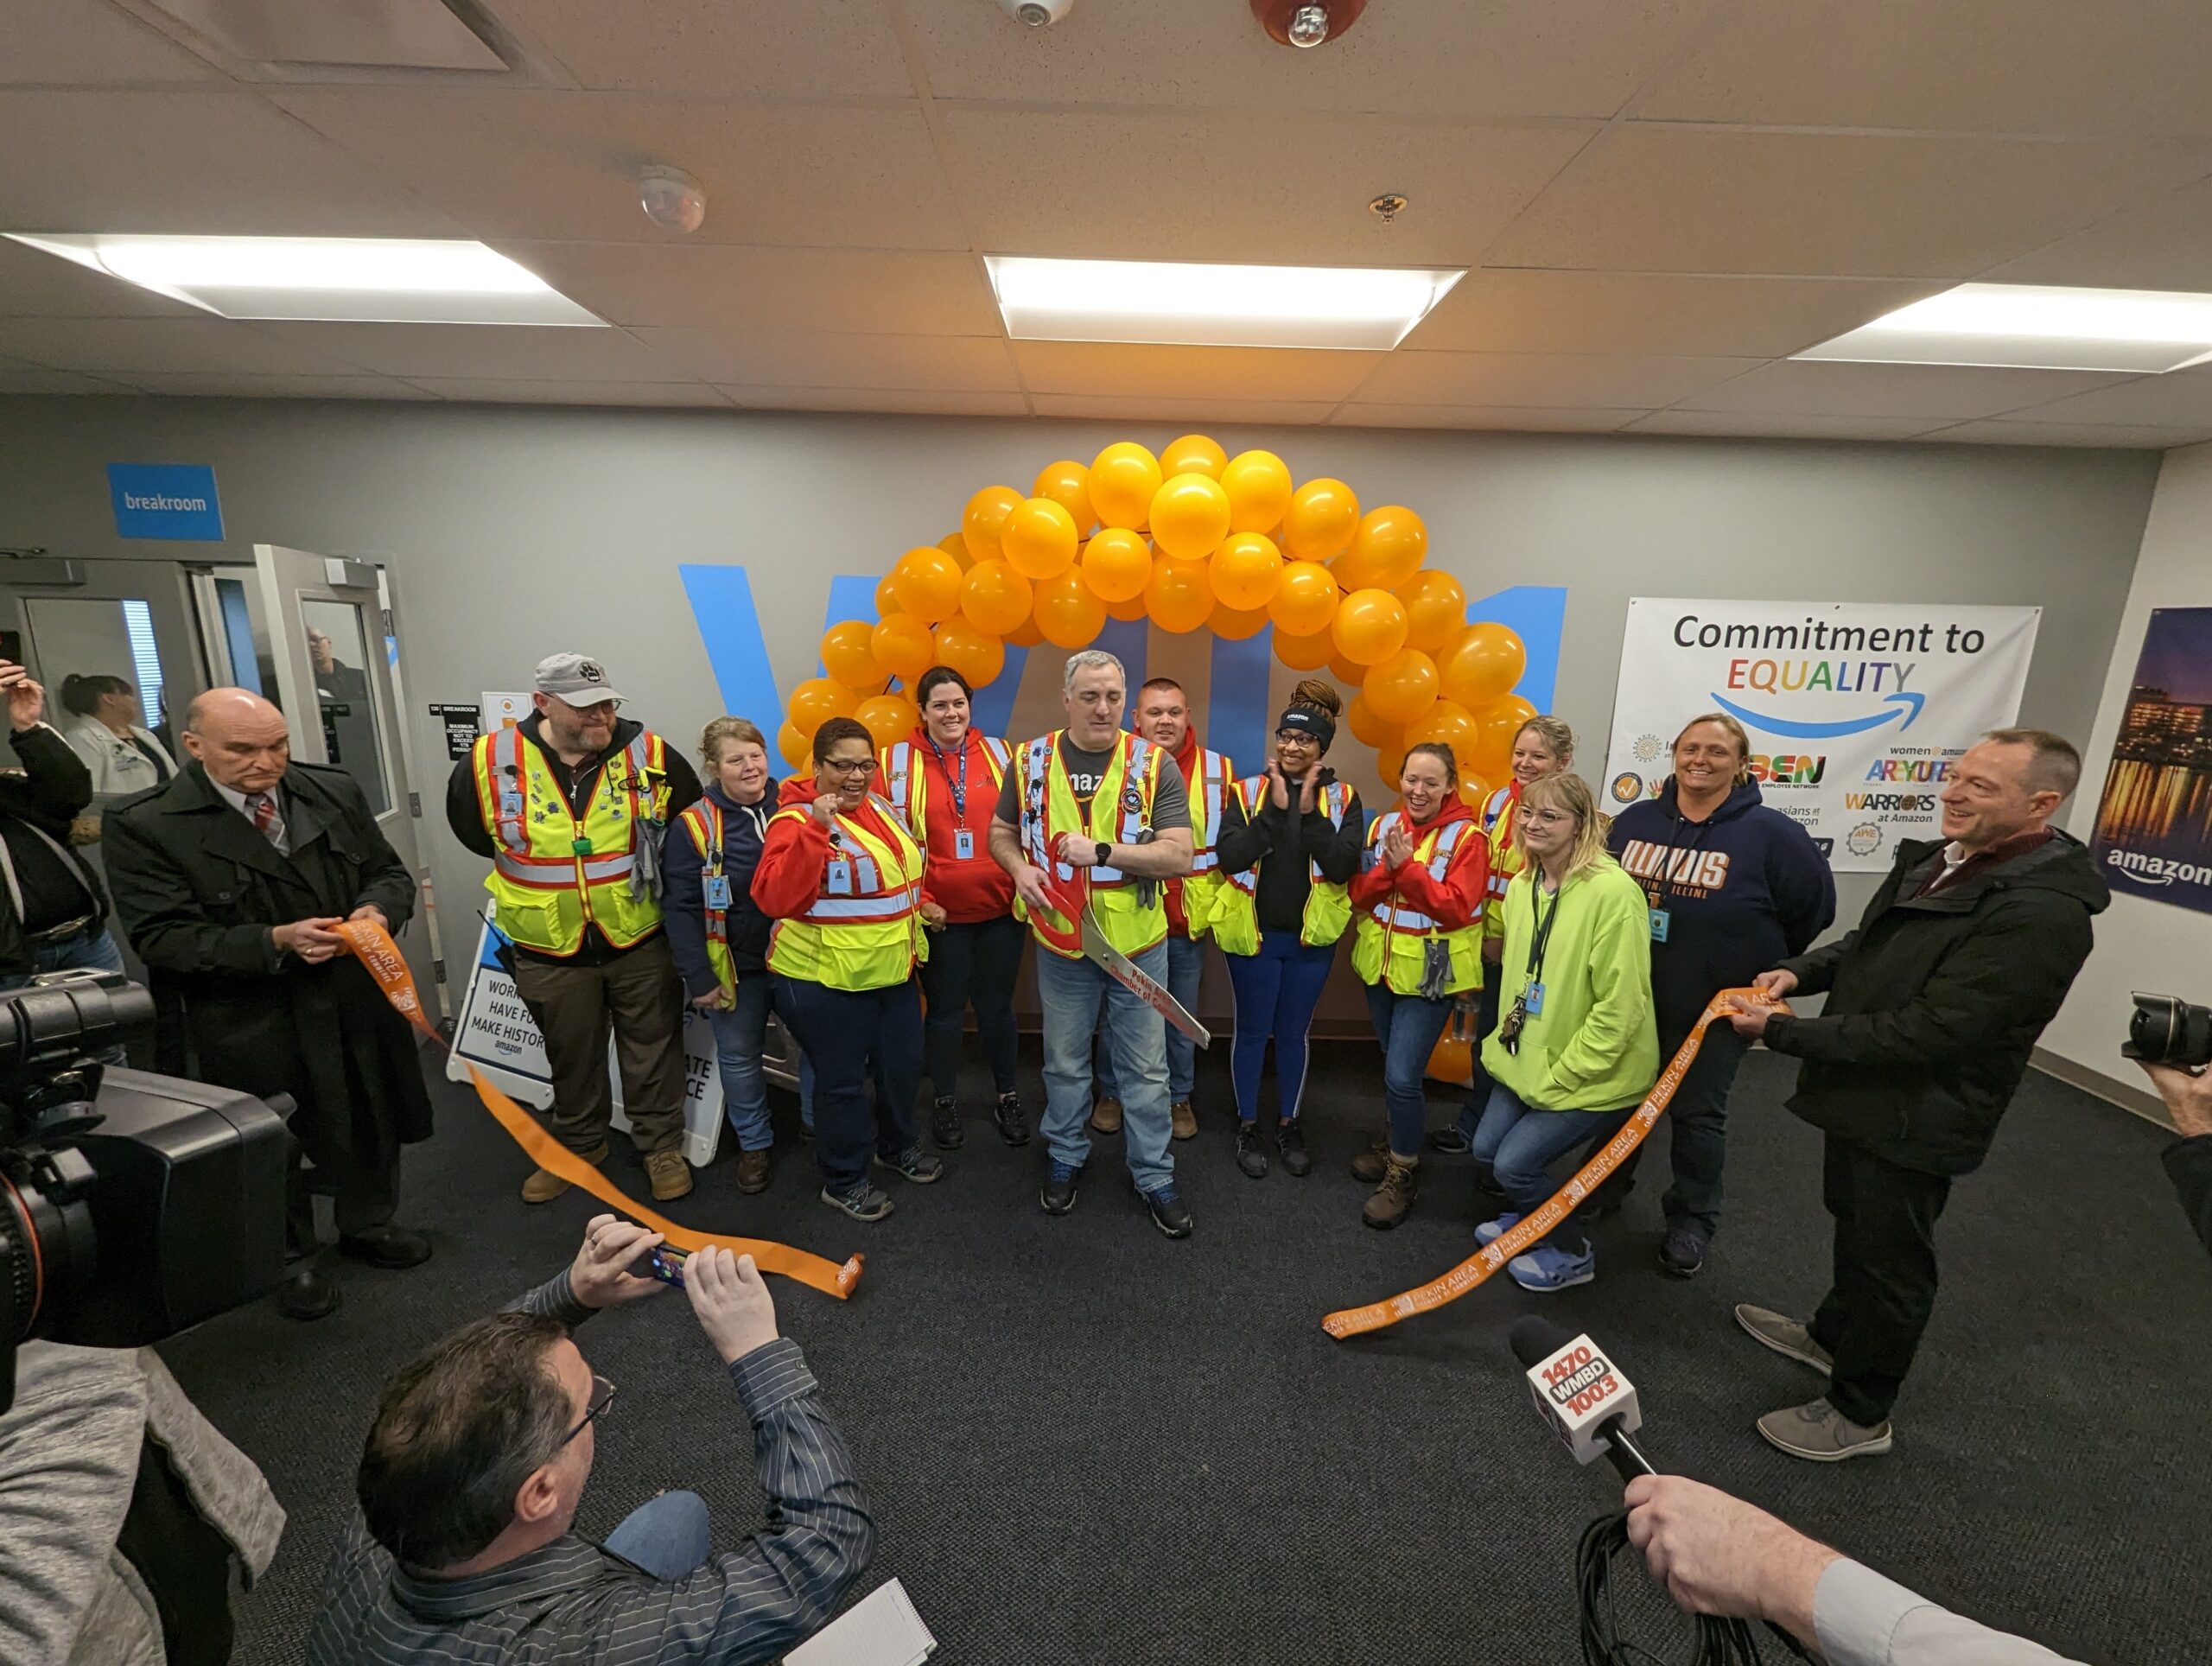 Group of people standing in front of balloons at a ribbon cutting ceremony at an Amazon fulfillment facility